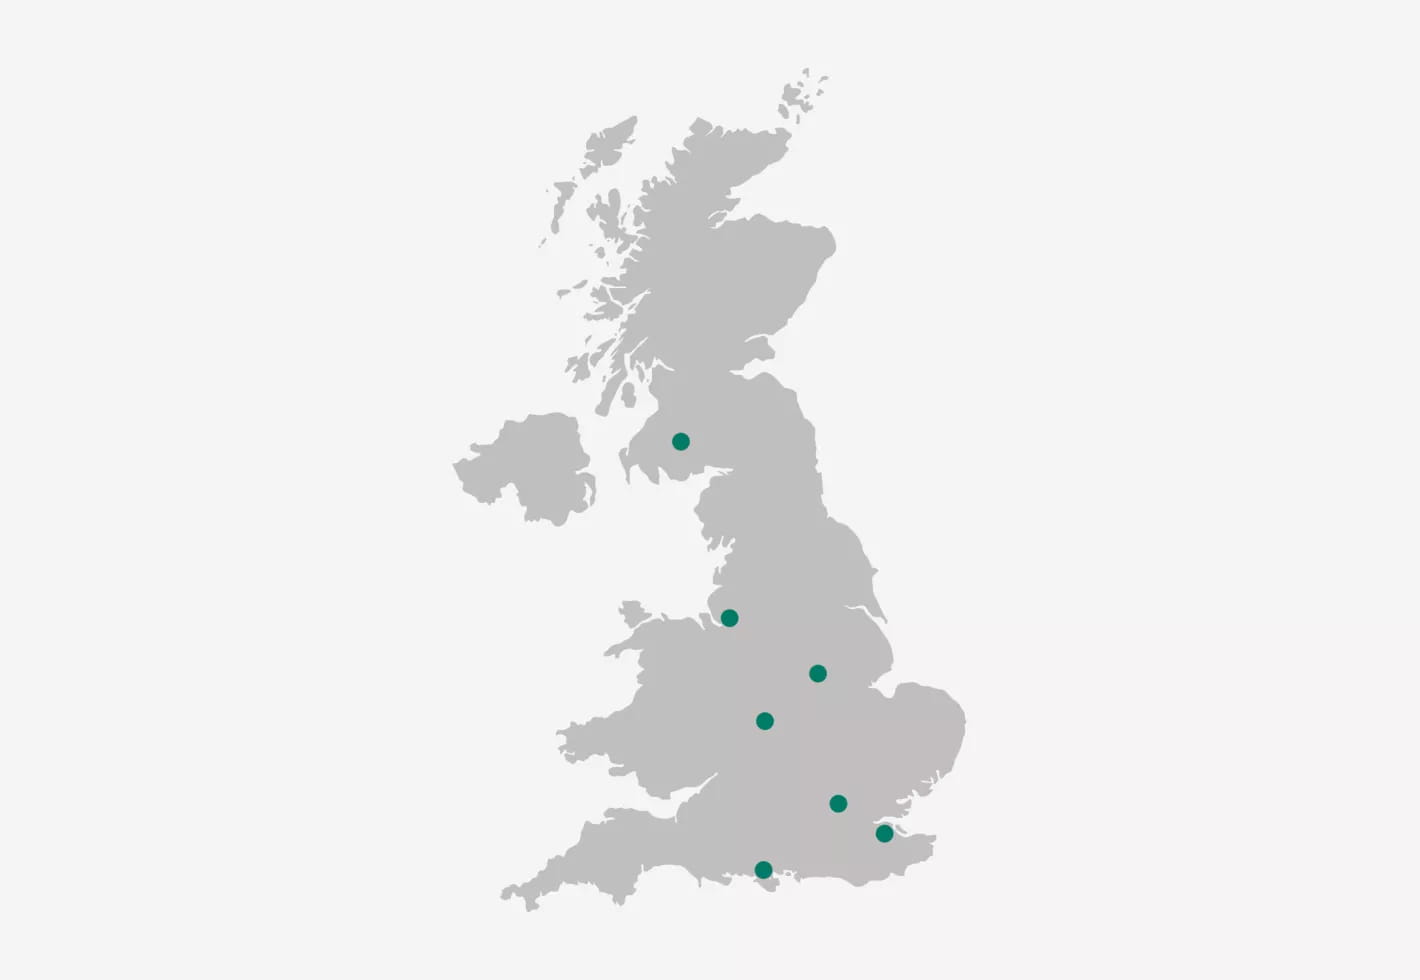 Our presence in the United Kingdom